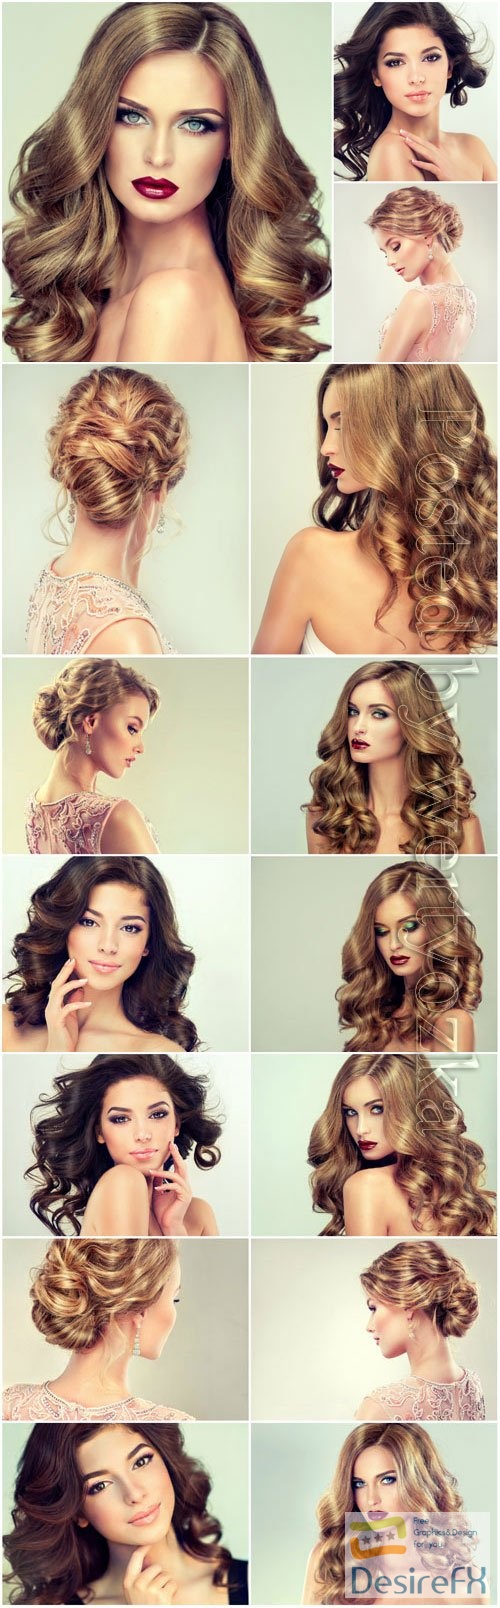 Beautiful hairstyles and makeup for girls stock photo